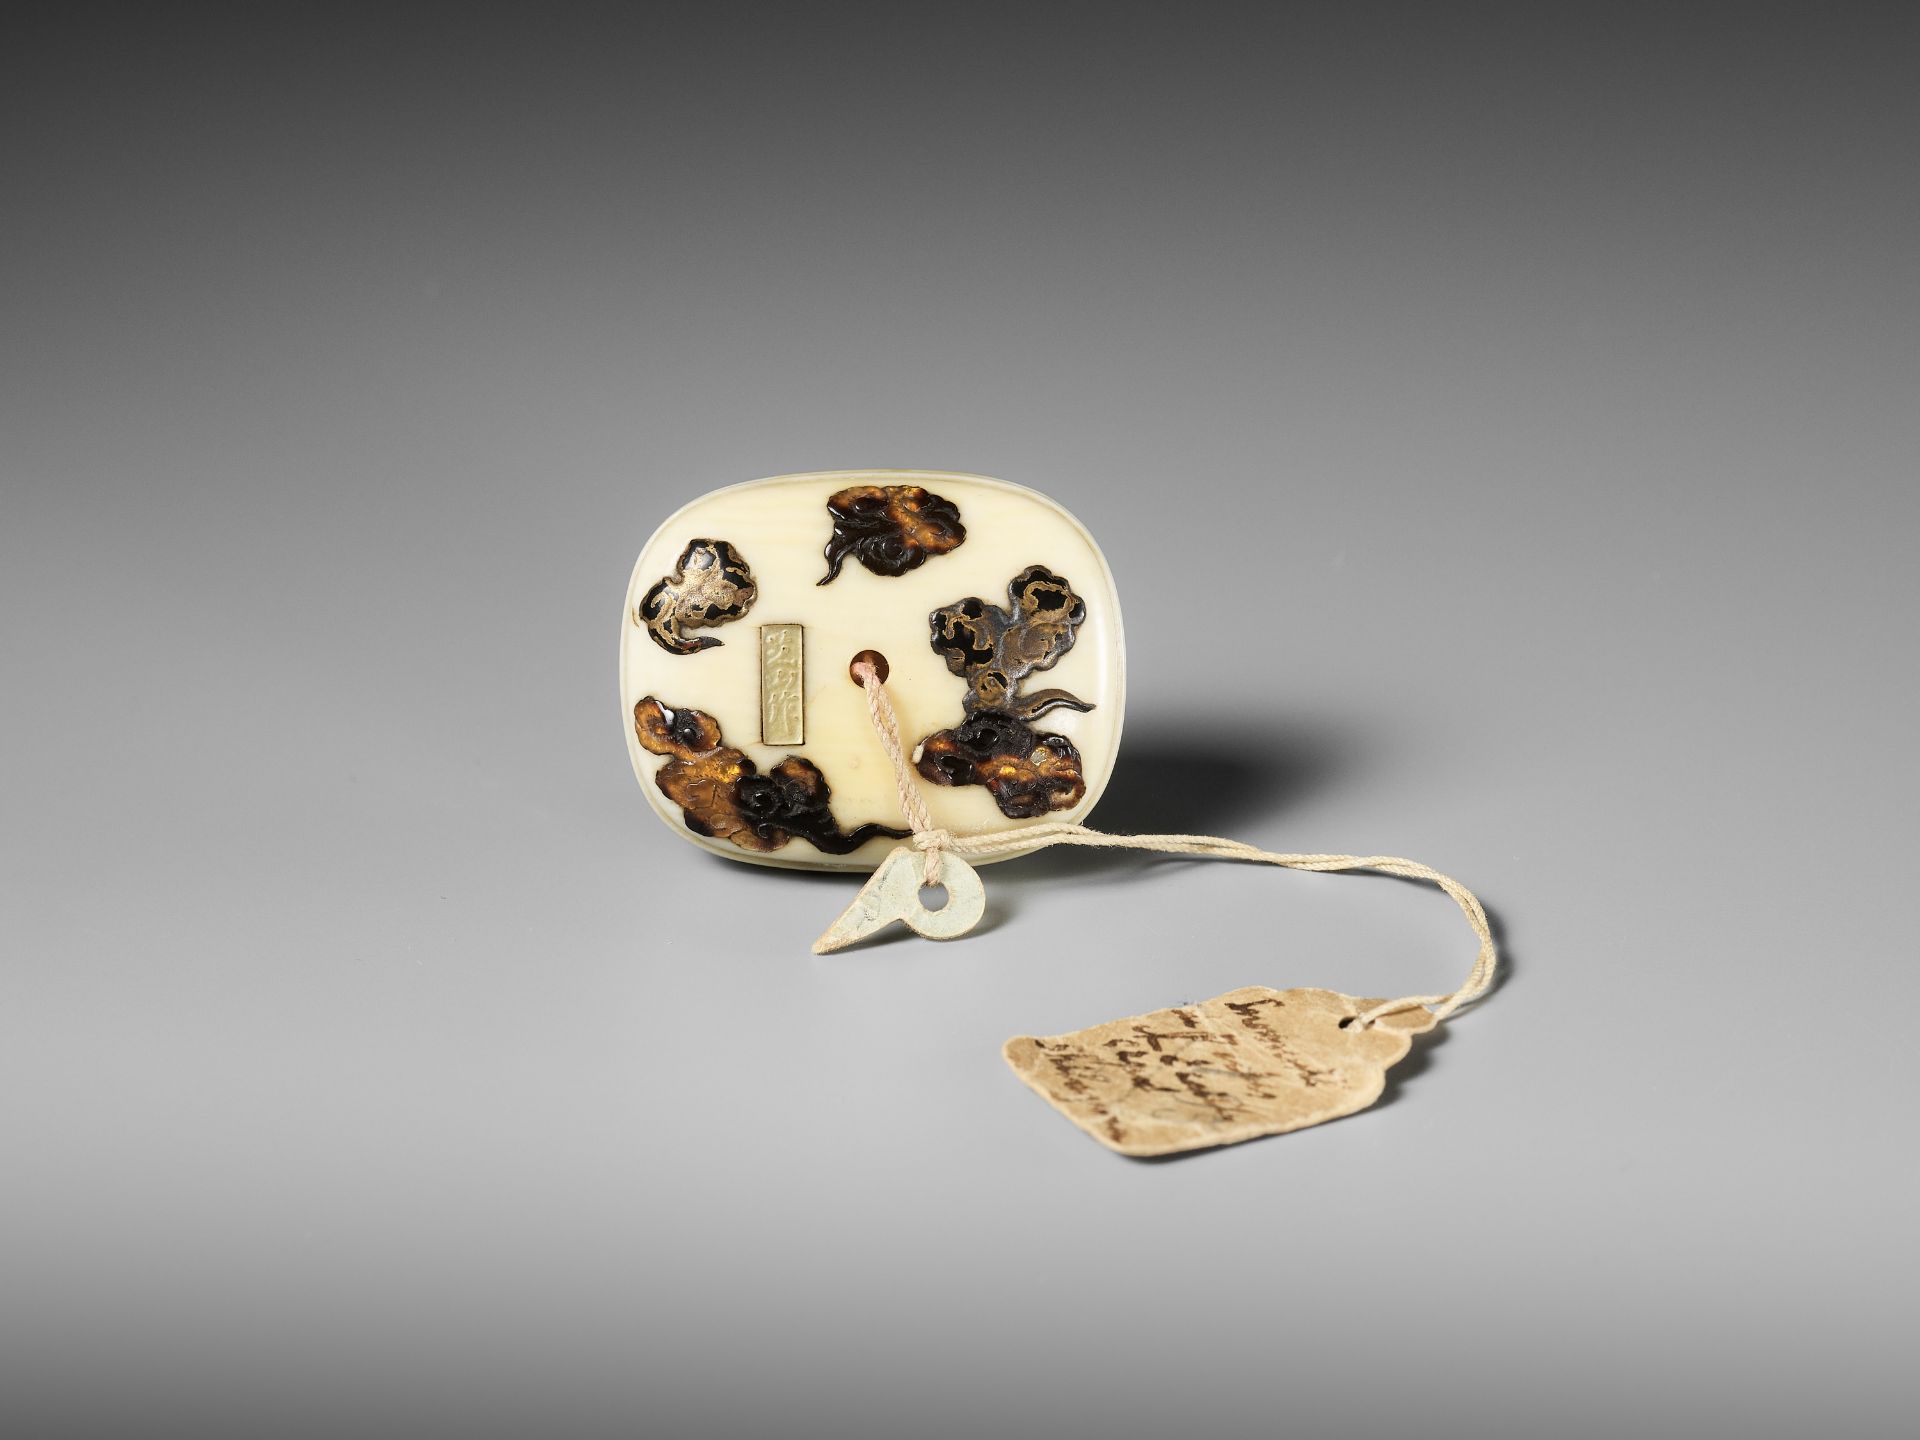 SHIBAYAMA: A FINE LACQUERED AND INLAID IVORY MANJU NETSUKE DEPICTING CRANES AND CLOUDS - Image 3 of 9